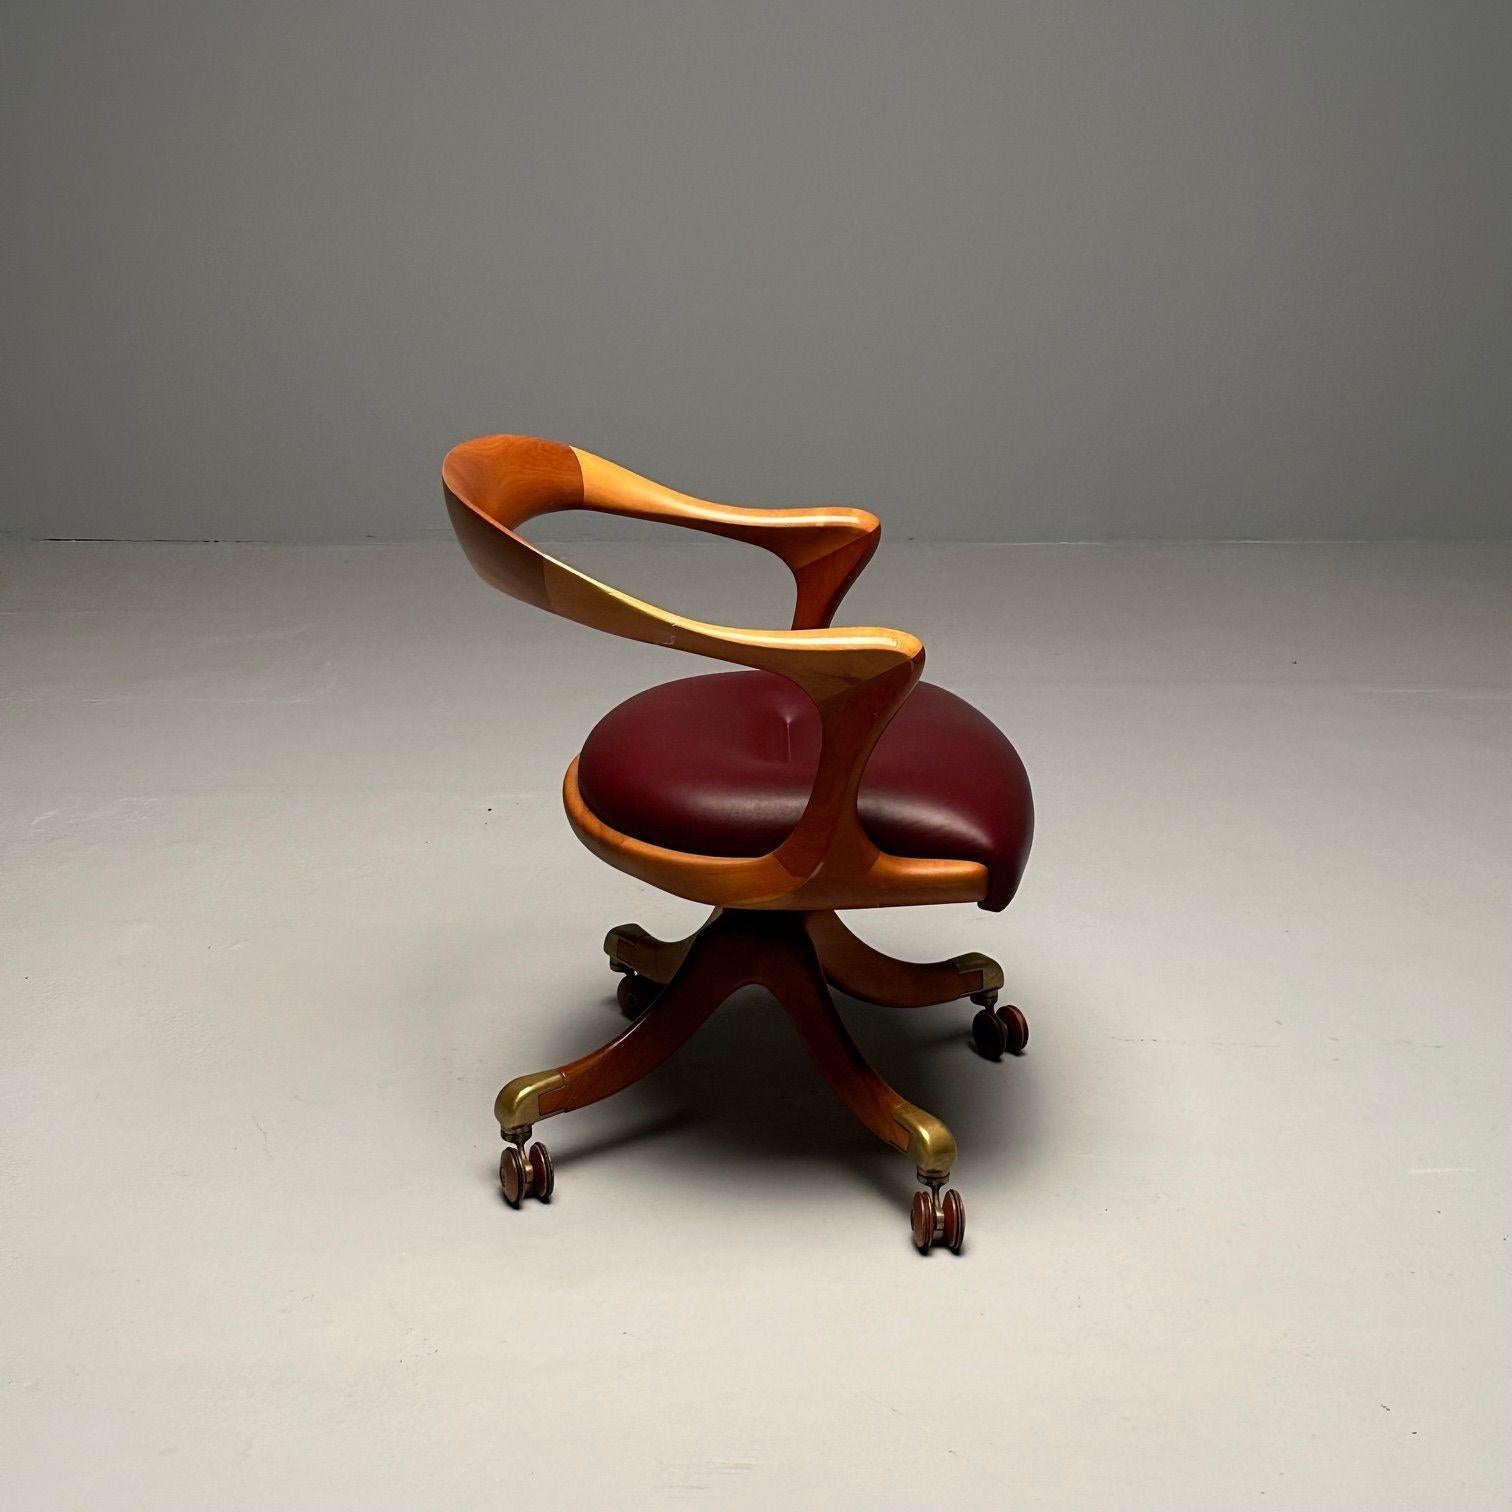 Ceccotti Collezioni, Modern, Office Chair, Light Walnut, Red Leather, 2000s For Sale 14